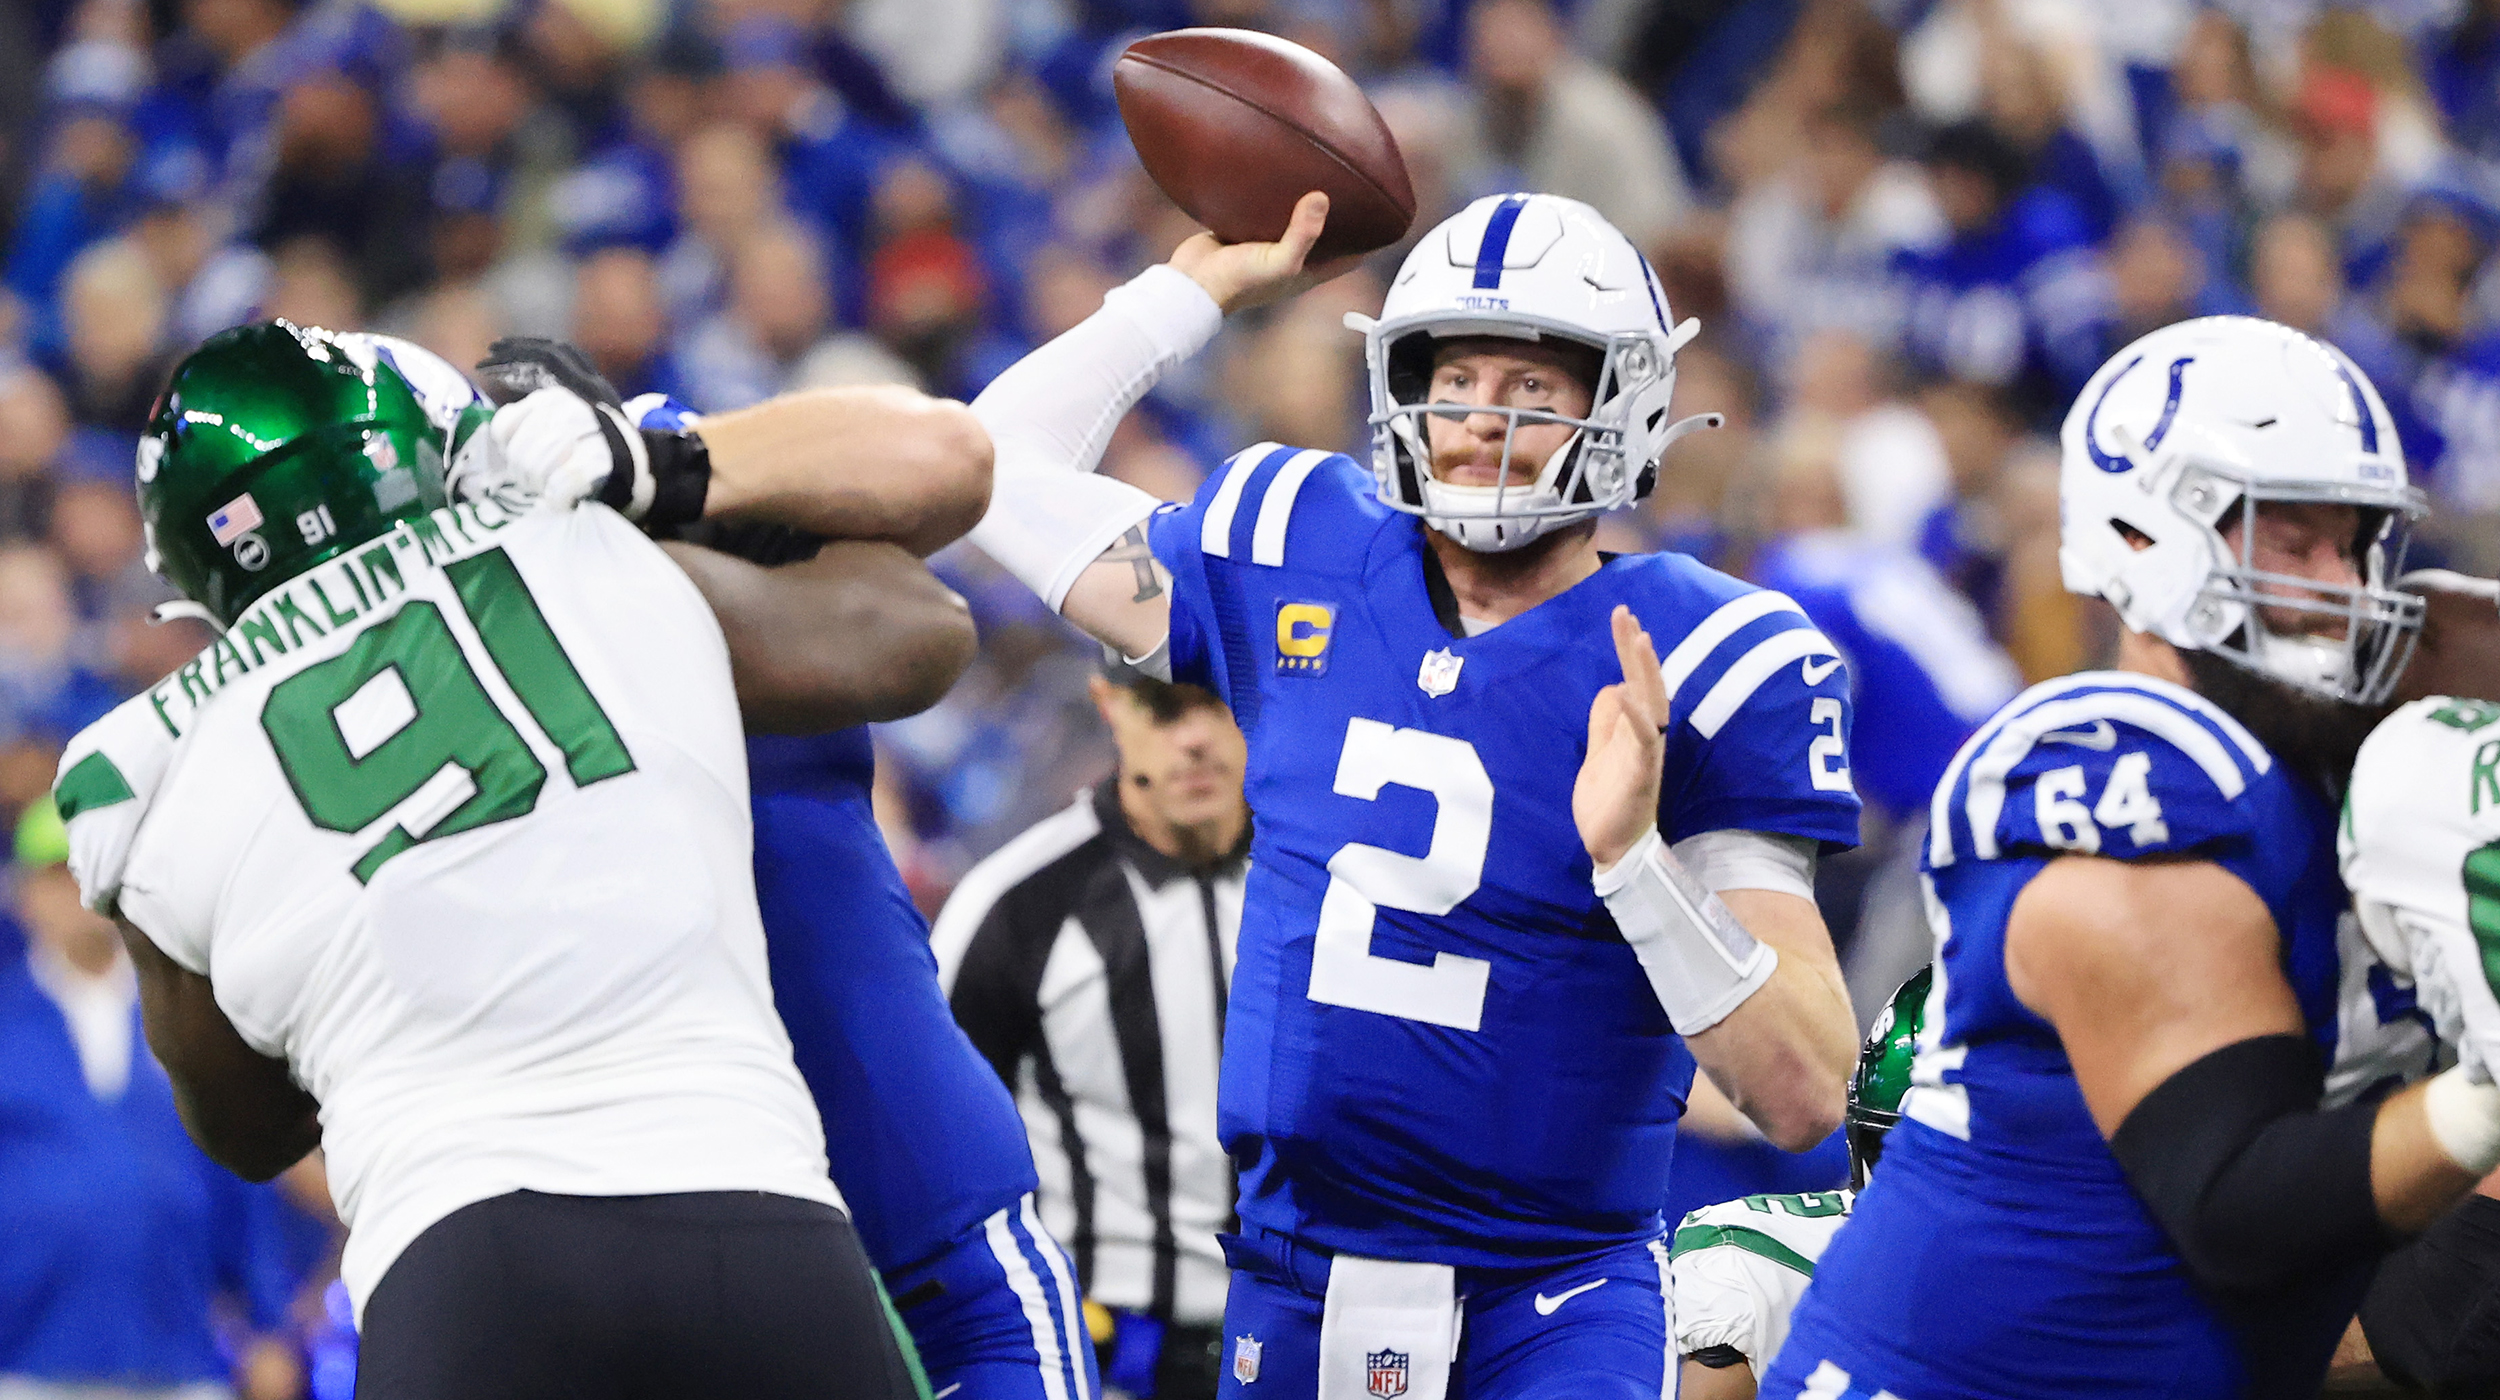 Carson Wentz #2 of the Indianapolis Colts looks to pass during the first half at Lucas Oil Stadium against the New York Jets on November 04, 2021 in Indianapolis, Indiana.